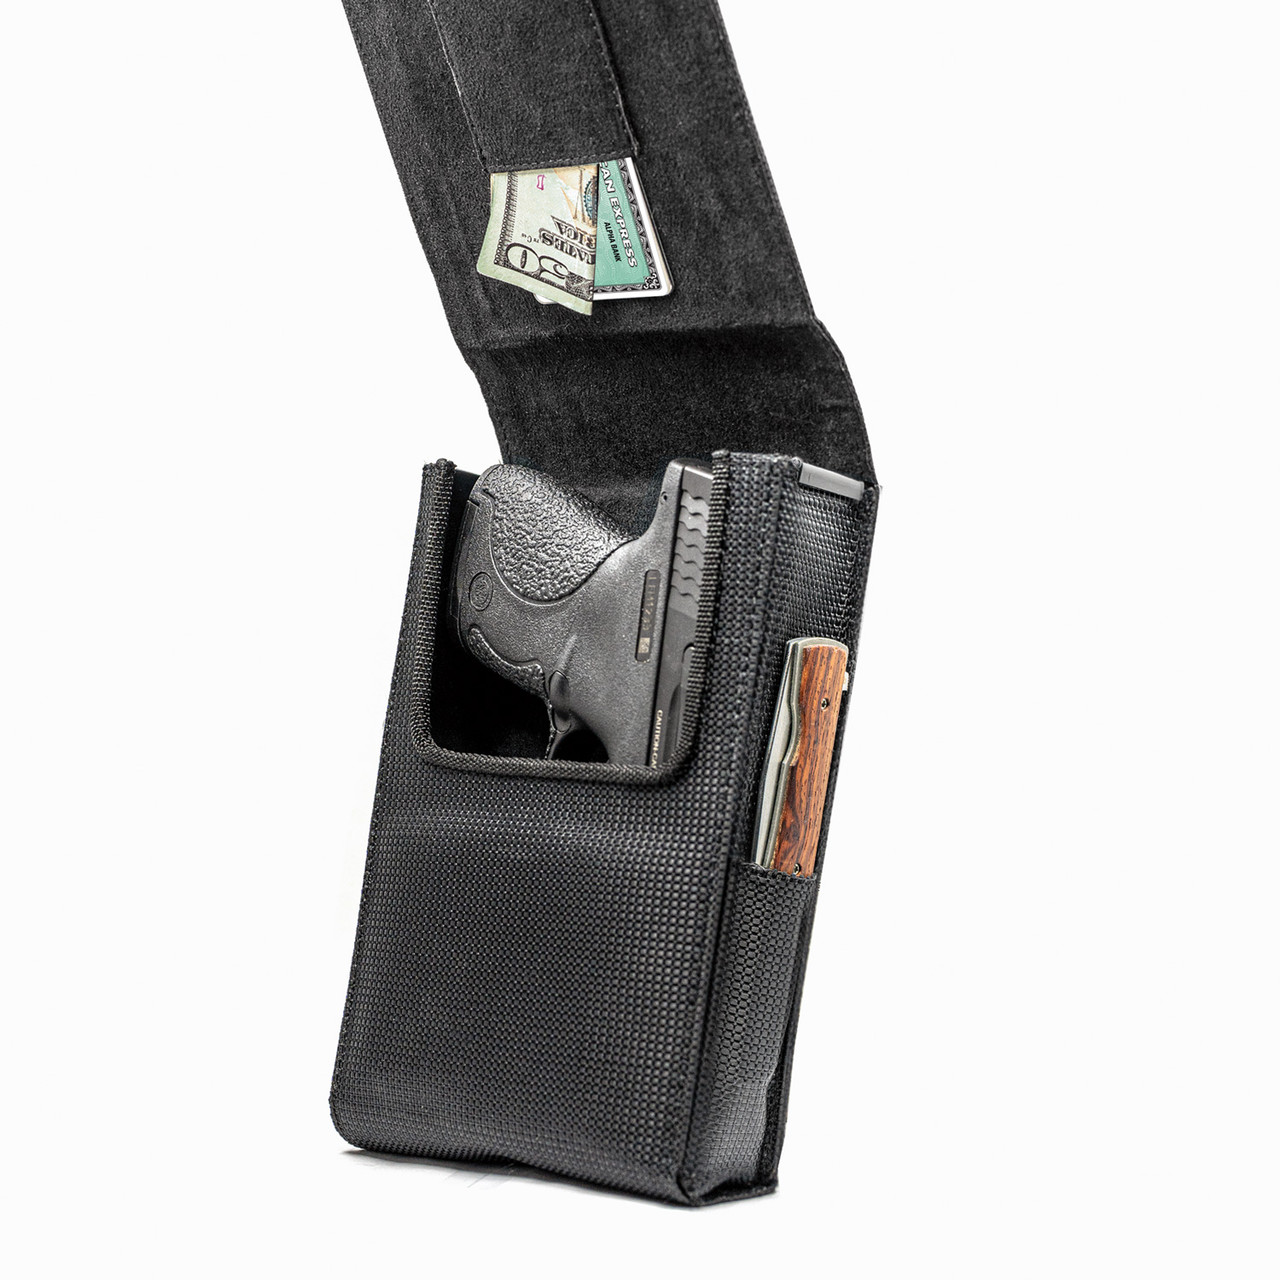 The S&W Equalizer 9mm Perfect Holster